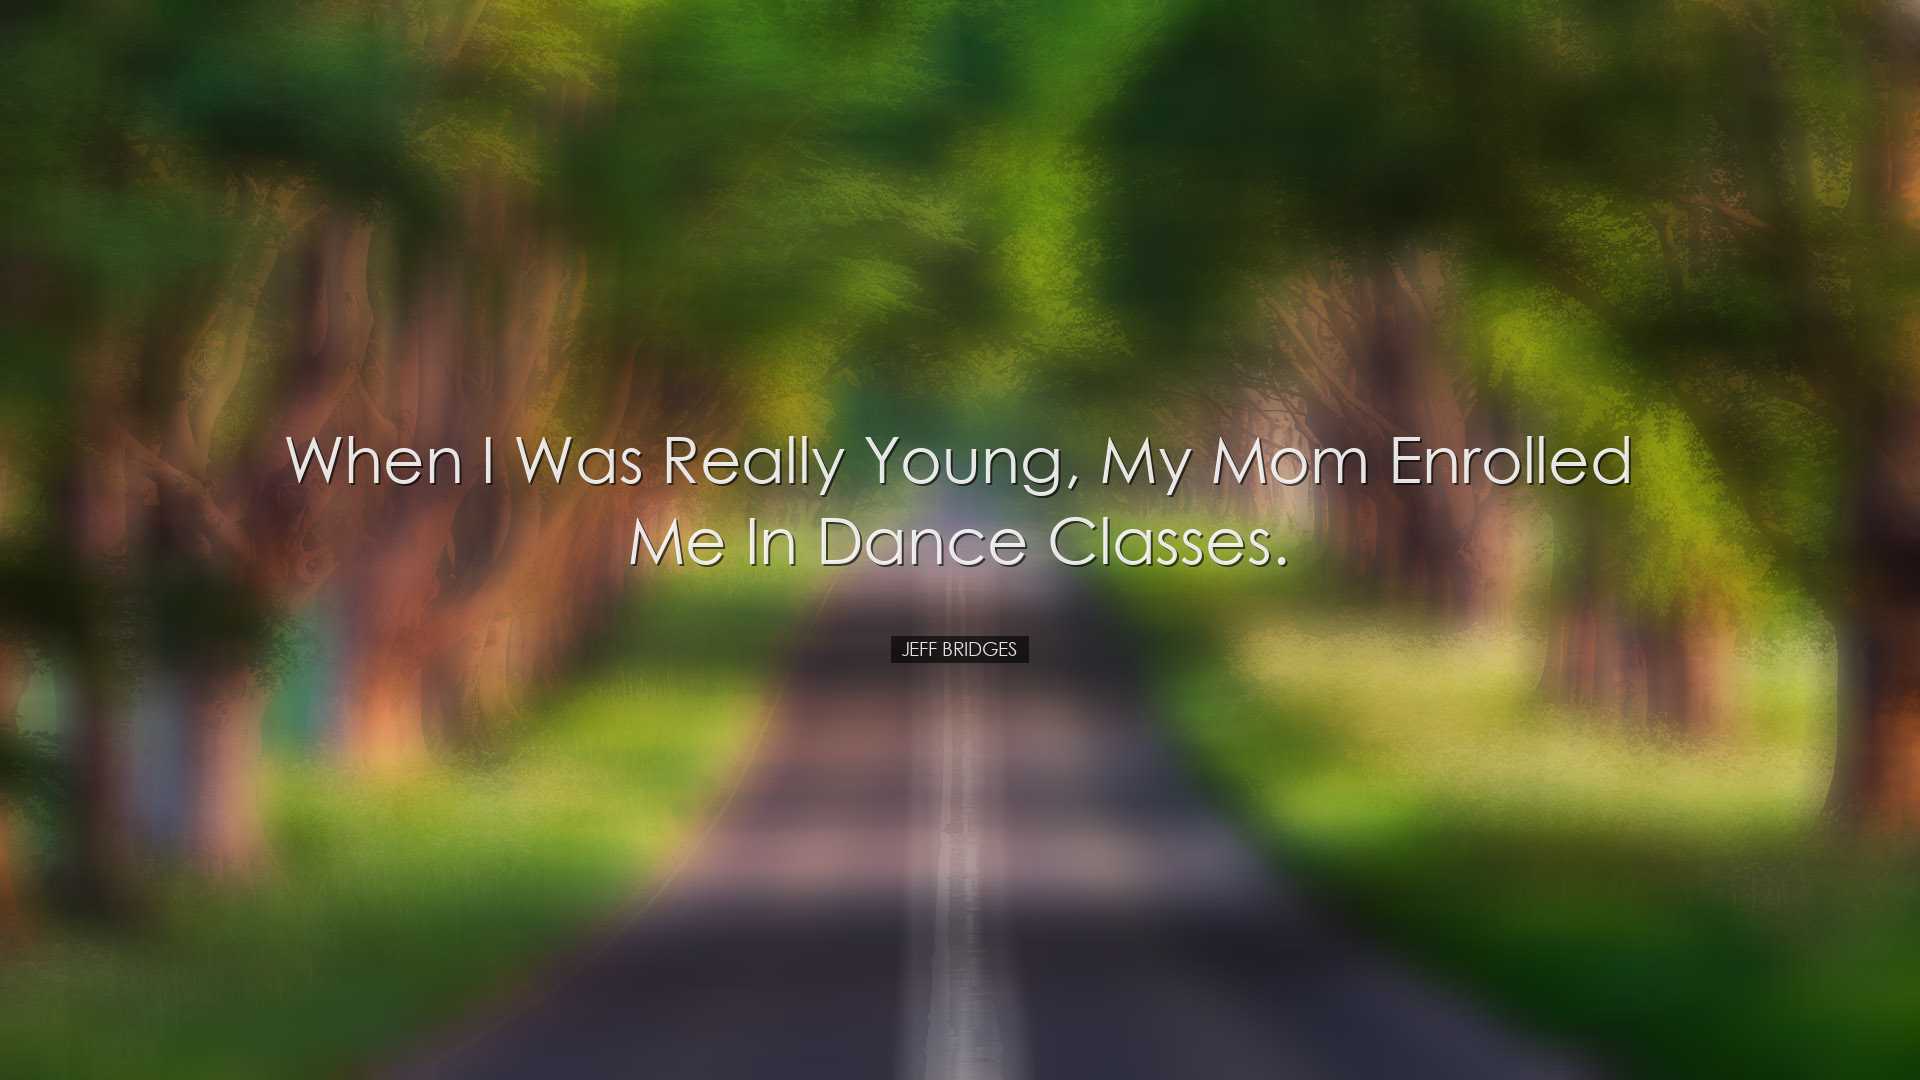 When I was really young, my mom enrolled me in dance classes. - Je